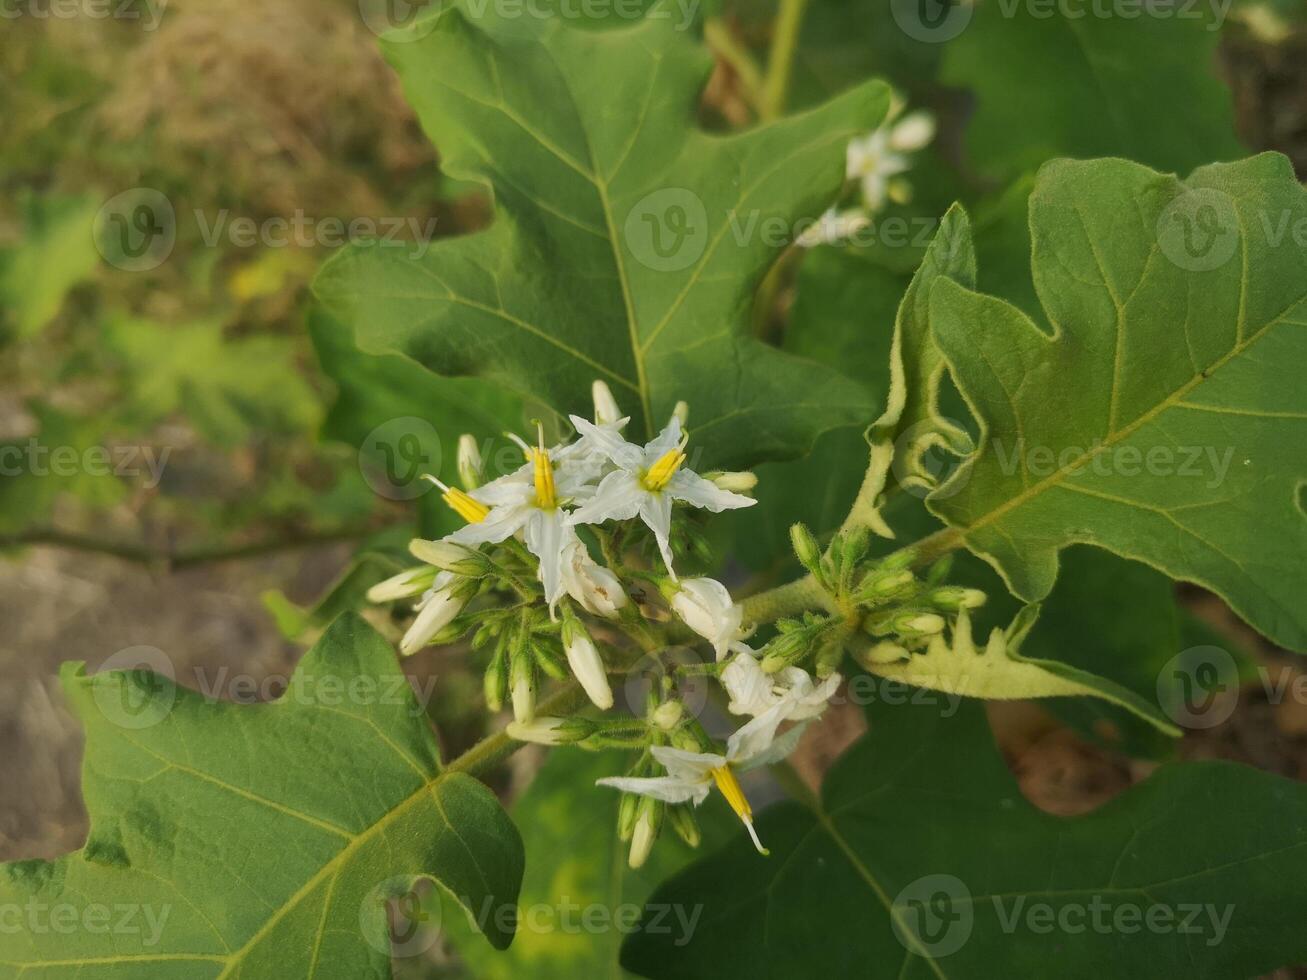 Solanum torvum, Pea Eggplant, plate brush green vegetable tree blooming in garden on nature background photo